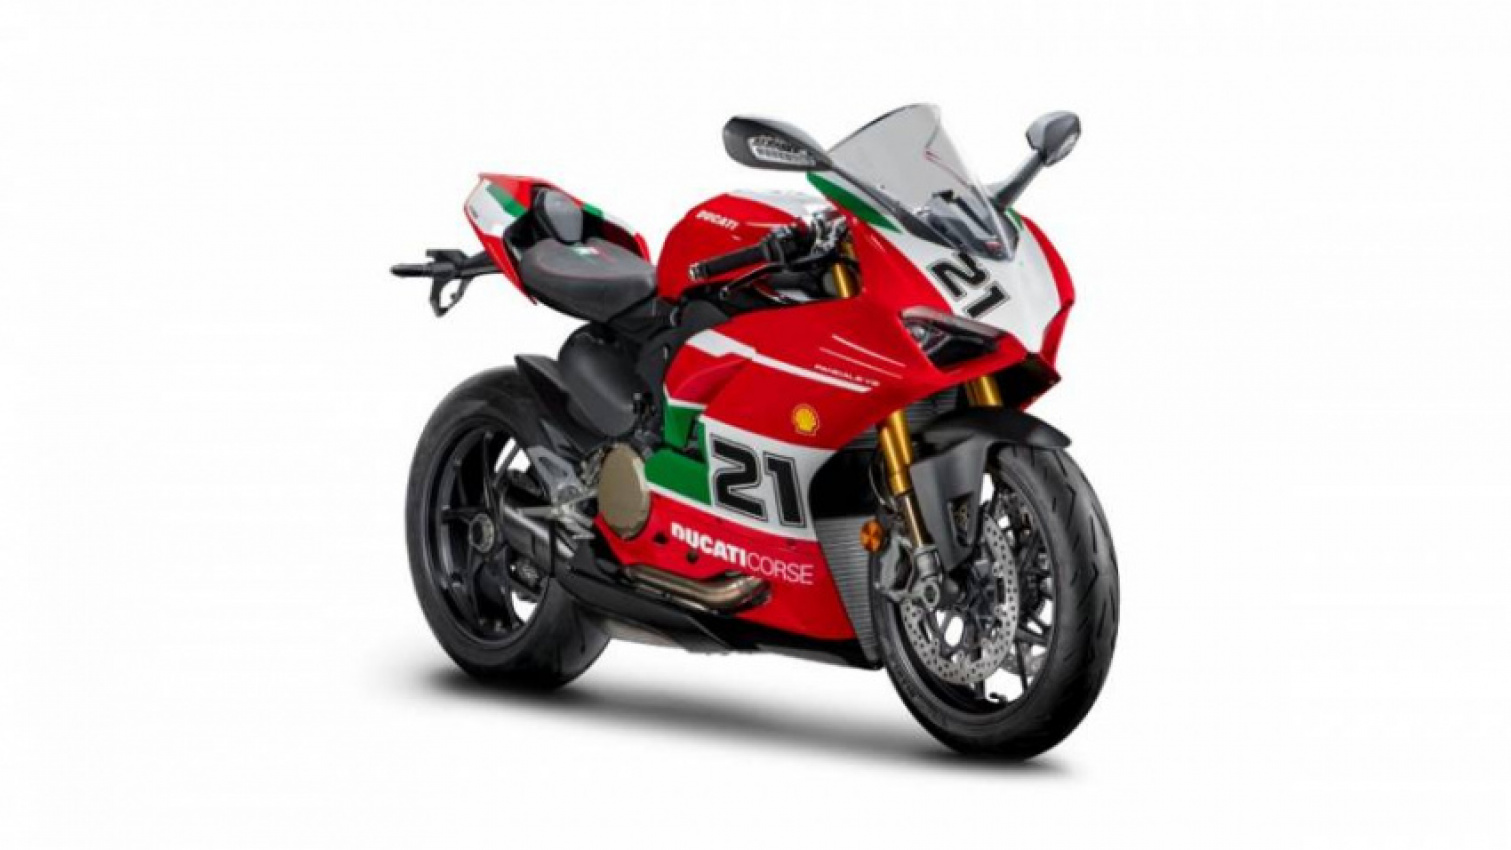 autos, cars, ducati, ducati panigale v2, ducati panigale v2 troy bayliss edition, overdrive, special edition, vnex, ducati launches panigale v2 troy bayliss edition at rs 21.3 lakh